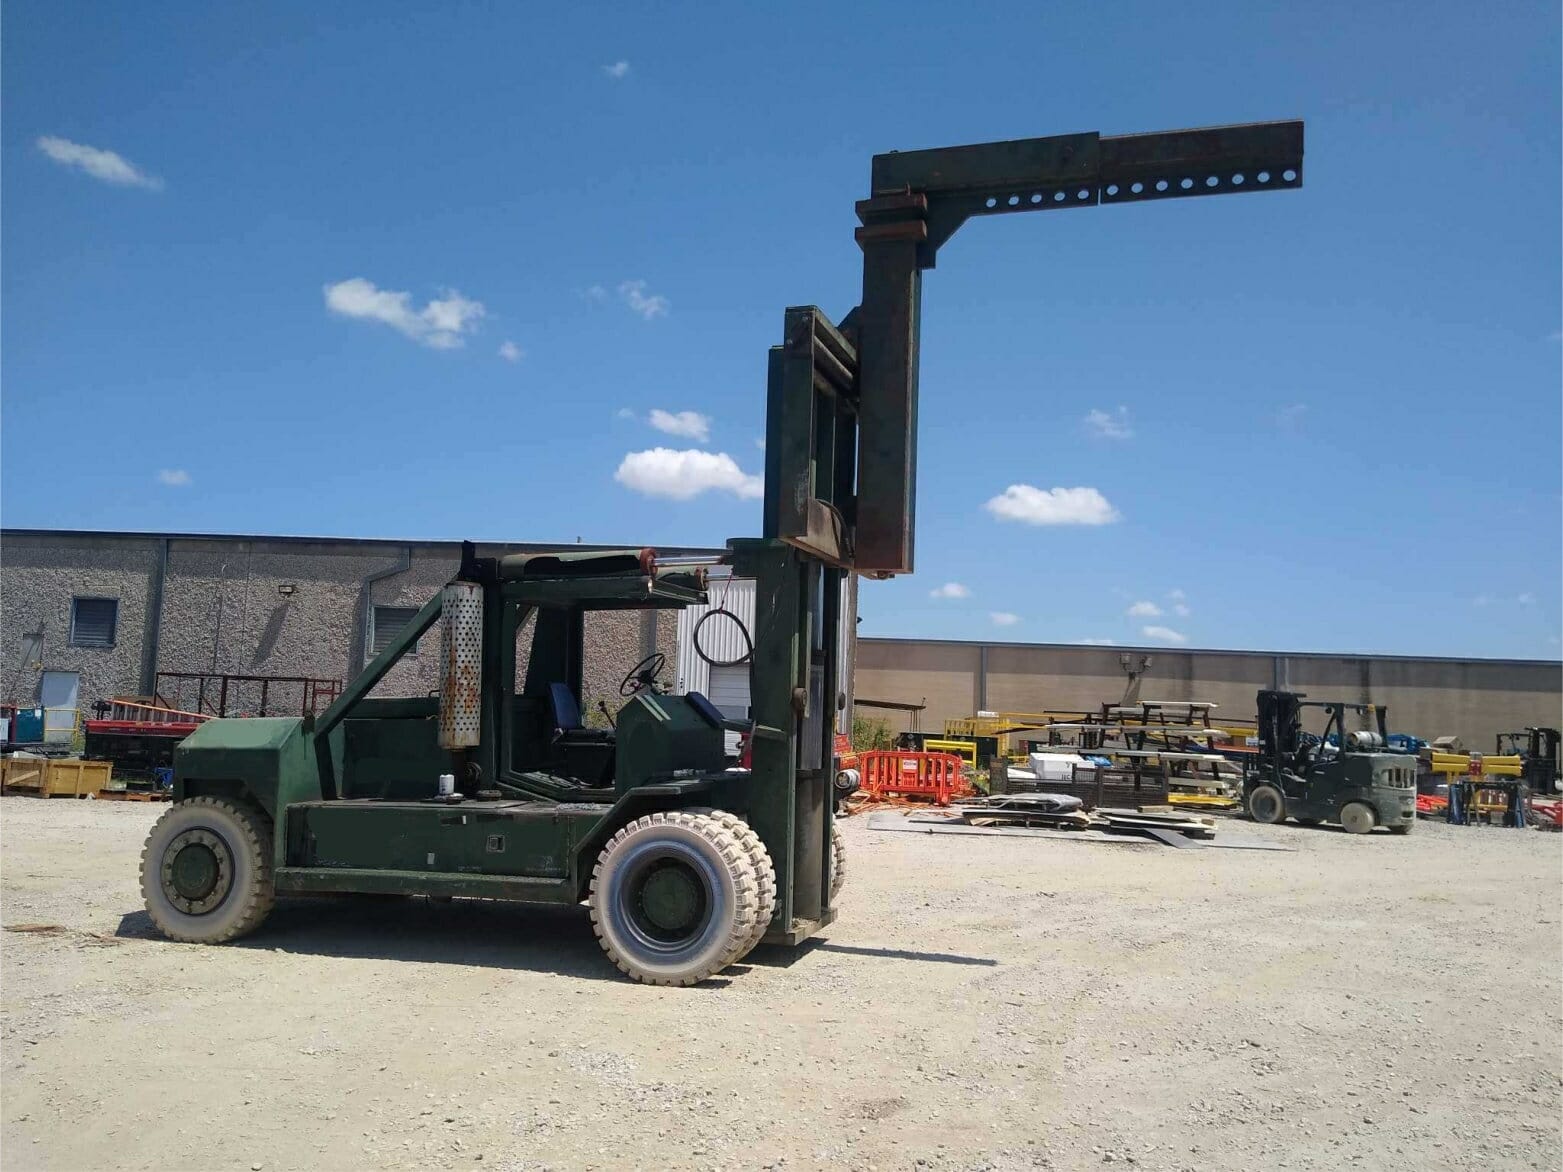 80000lb Forklift For Sale Affordable Machineryaffordable Machinery